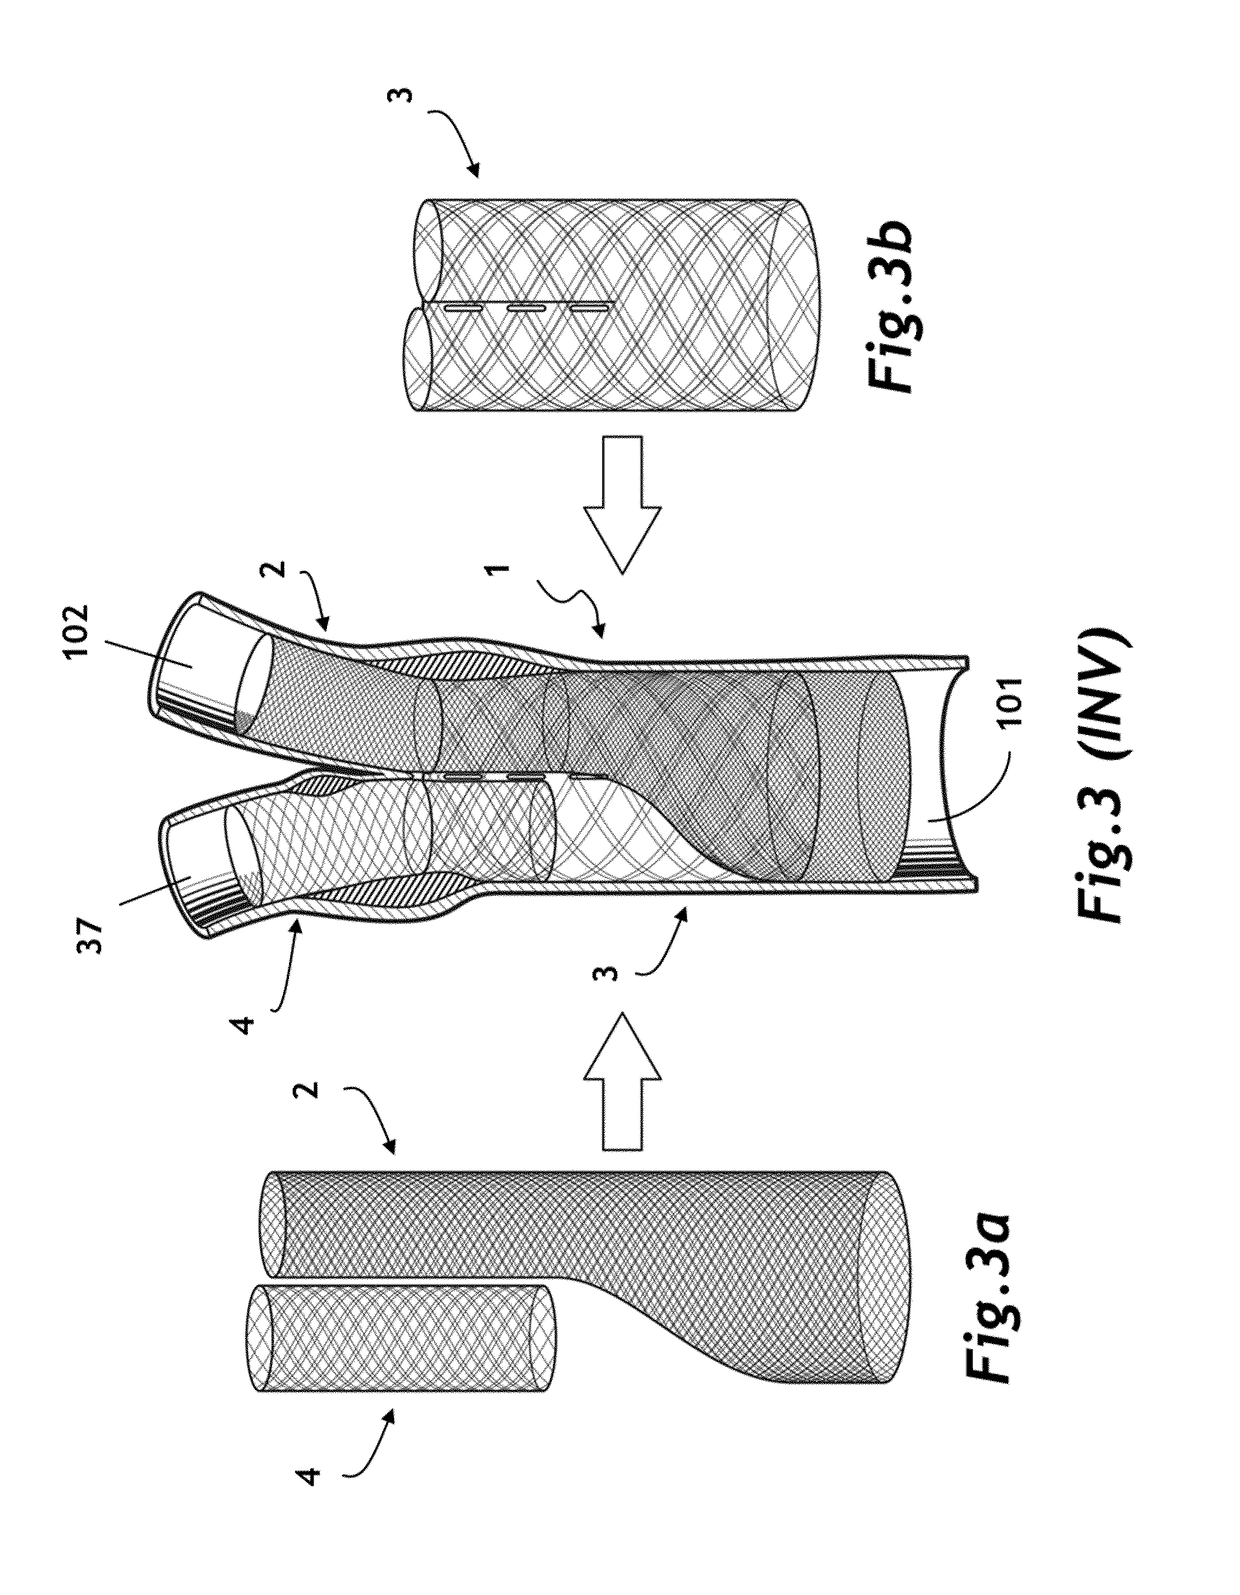 Bifurcated 3D filter assembly for prevention of stroke